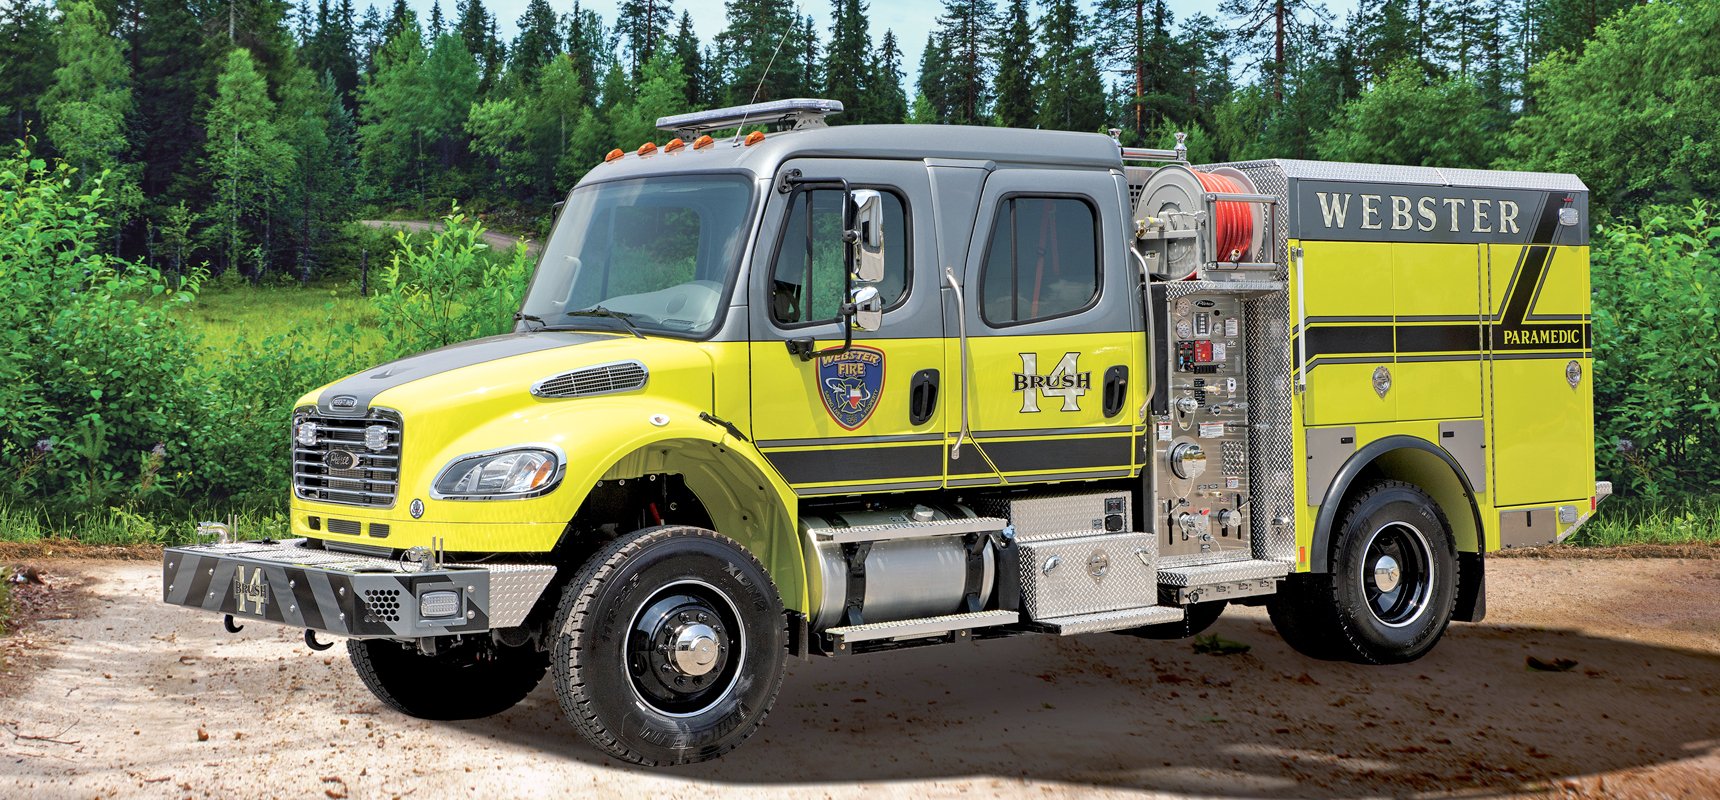 A yellow and grey wildland fire truck is parked on a dirt road with a dense evergreen forest in the background.